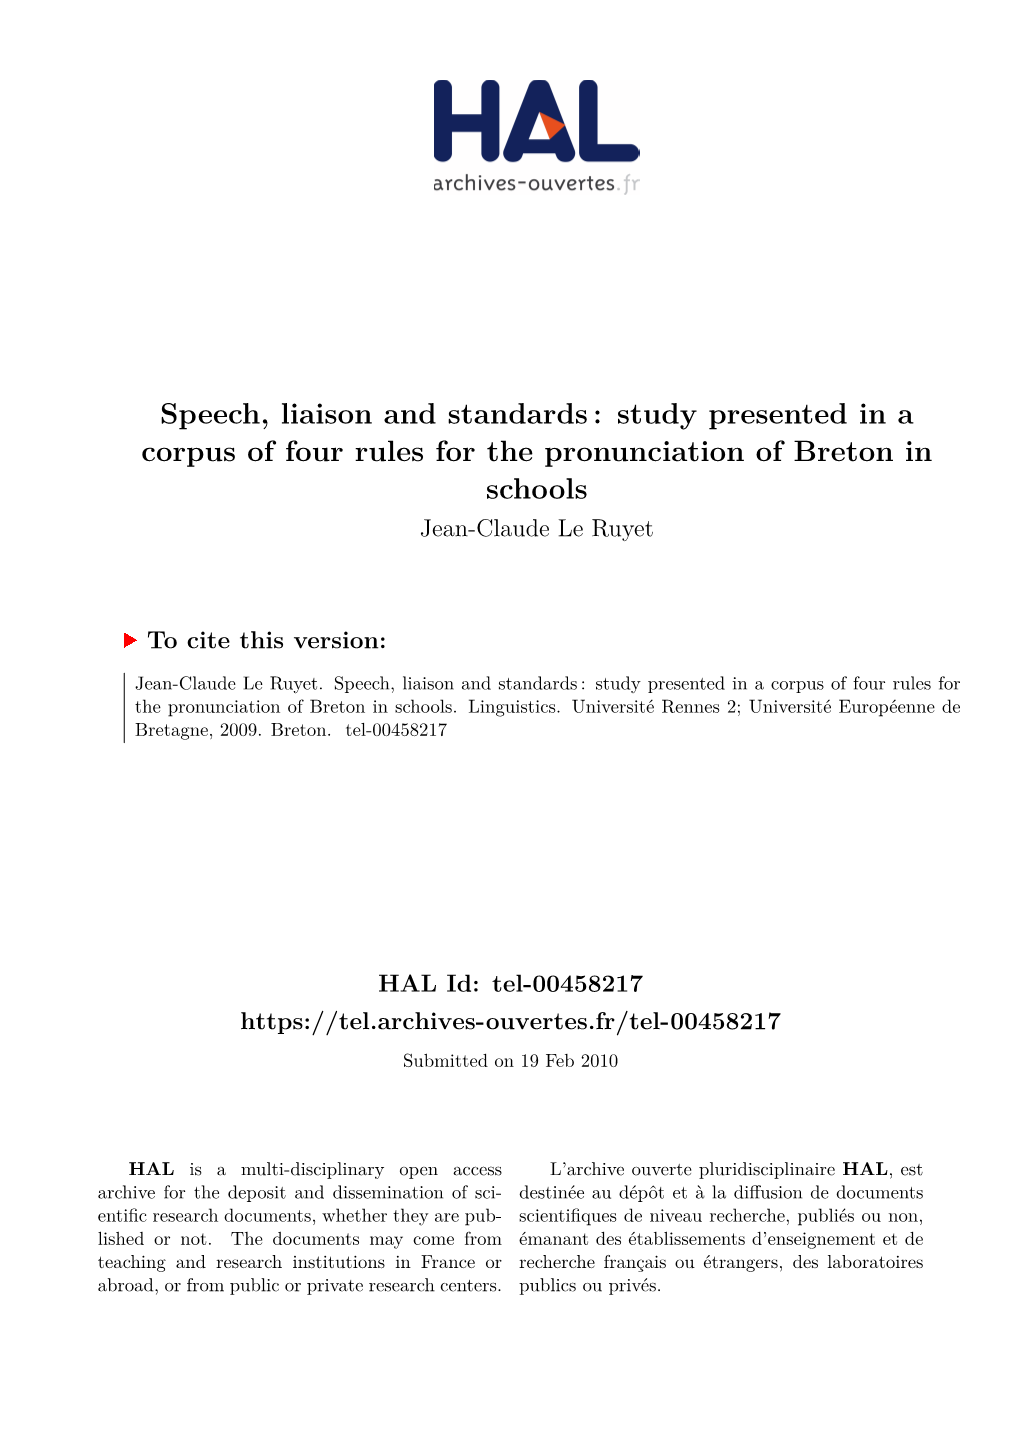 Speech, Liaison and Standards: Study Presented in a Corpus of Four Rules